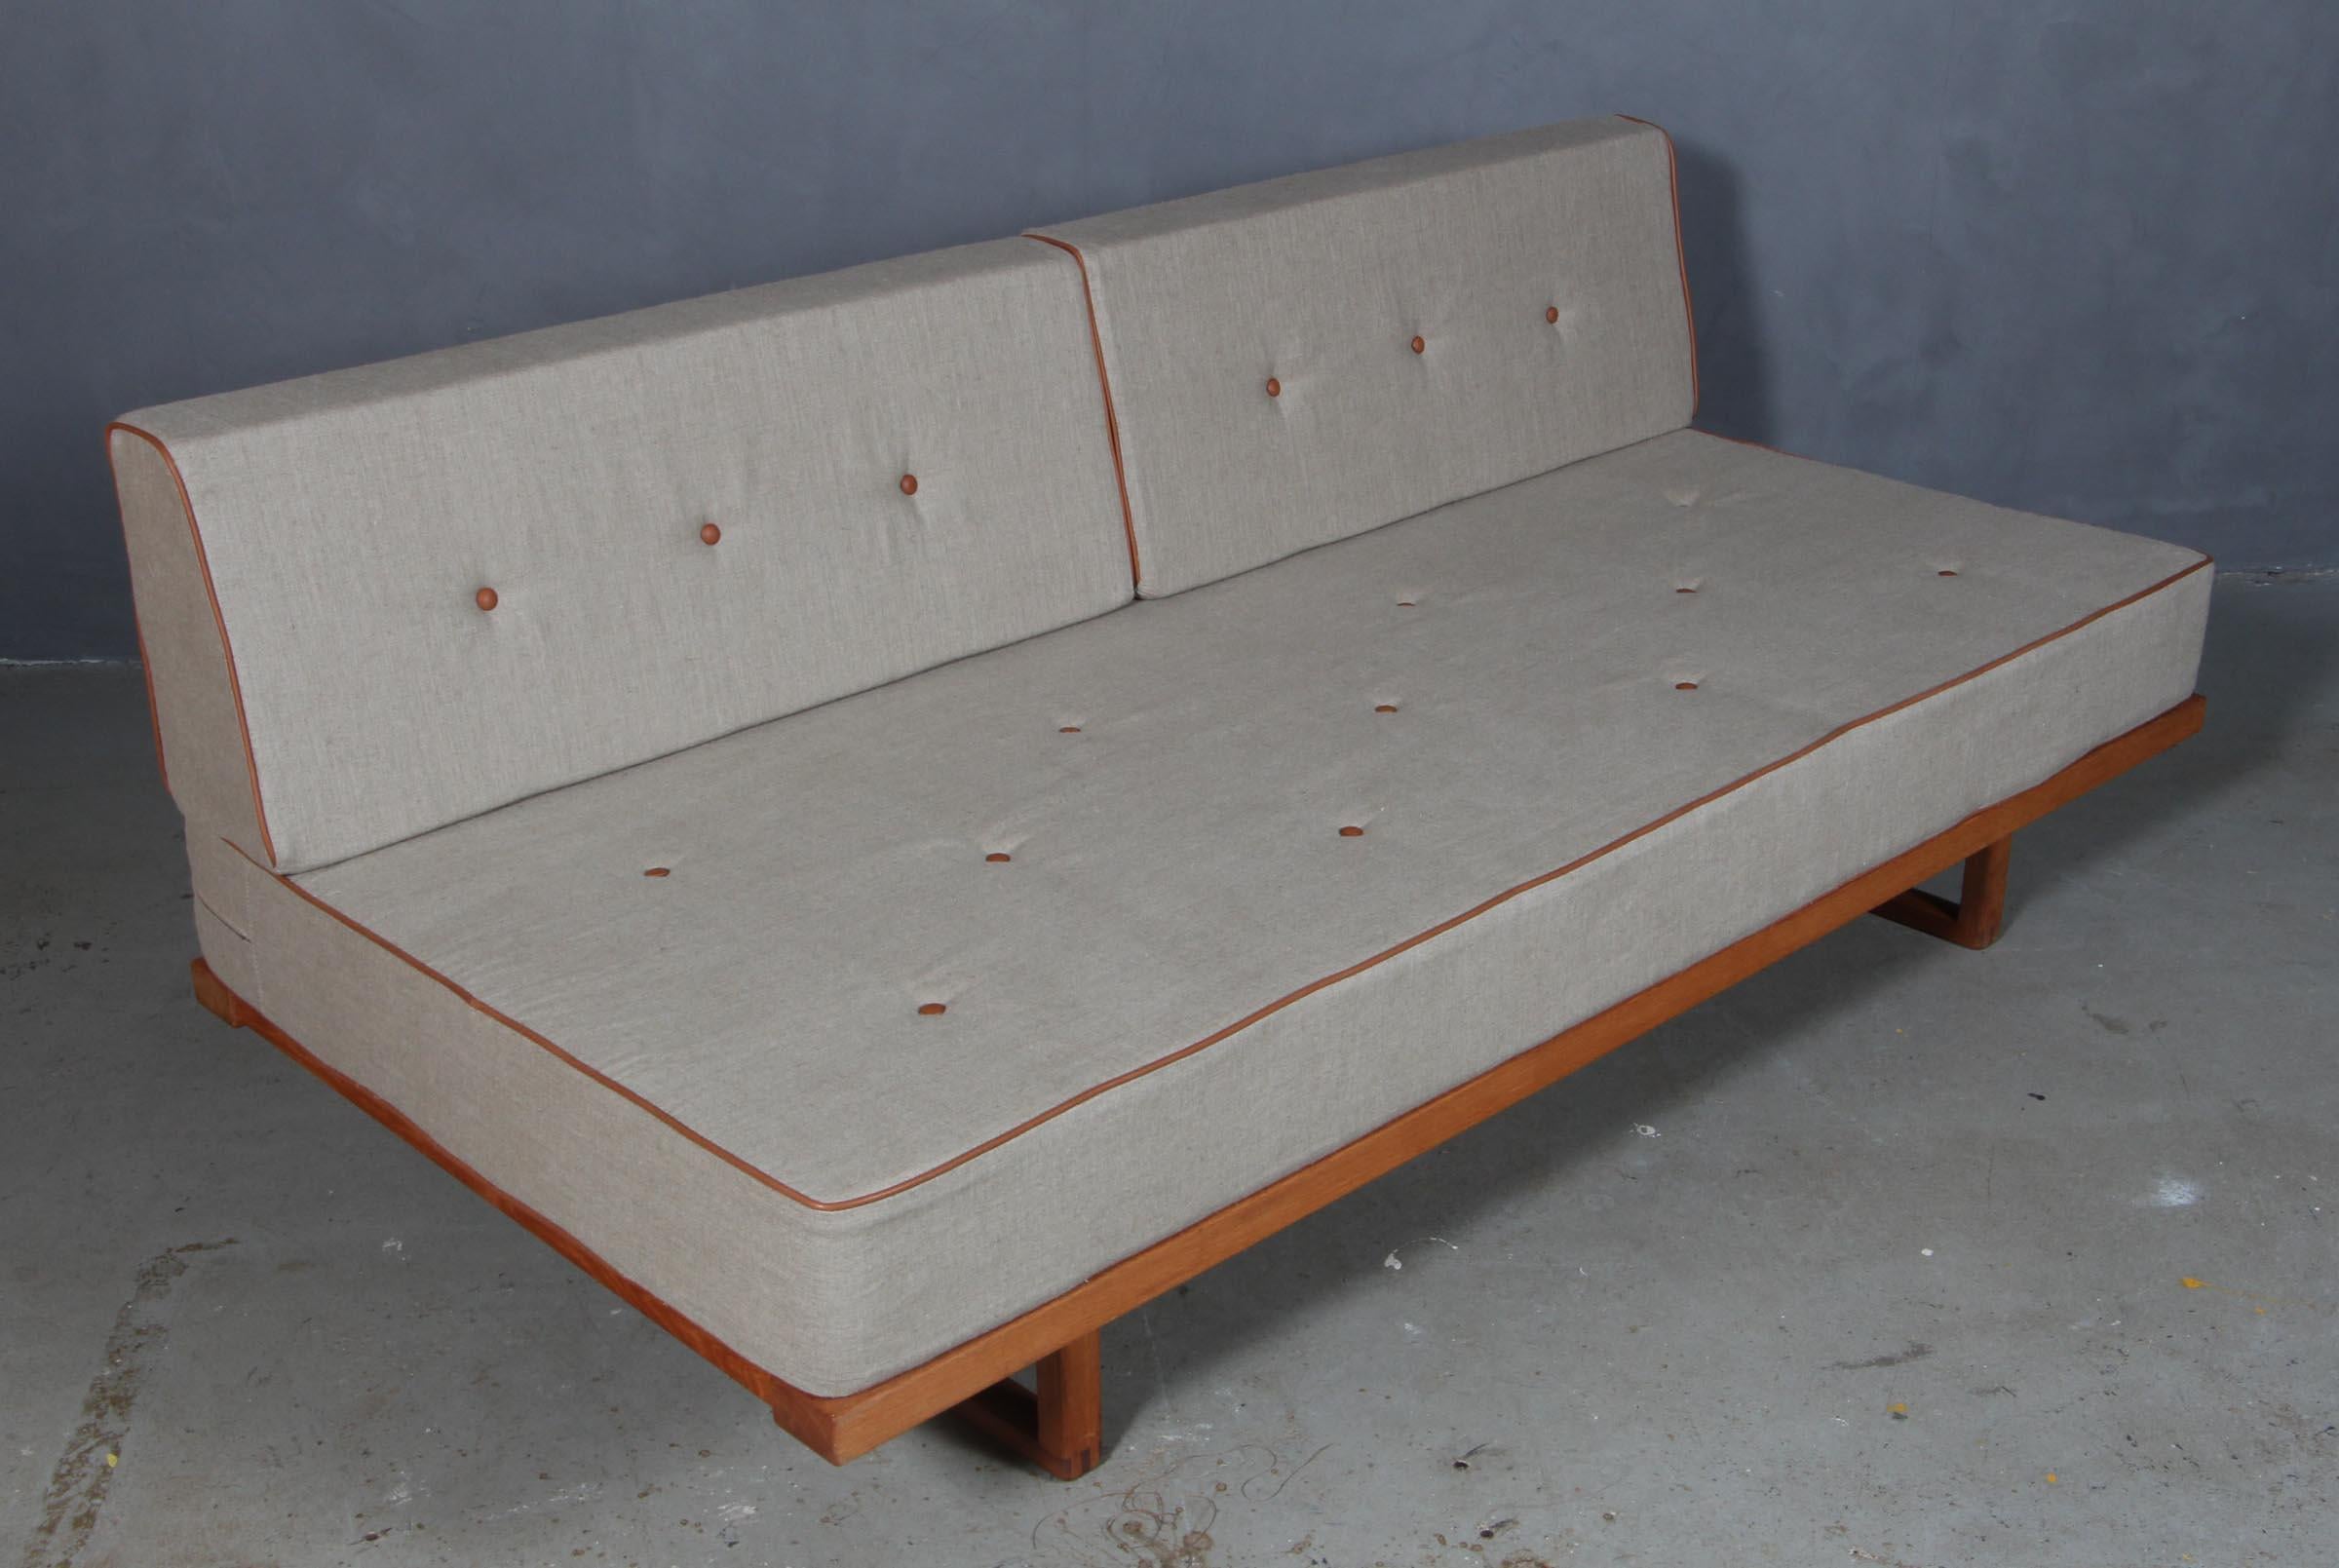 Børge Mogensen daybed / sofa with frame of oil treated oak.

New upholstered with canvas leather, leather piping and buttons.

Model 4311, made by Fredericia.